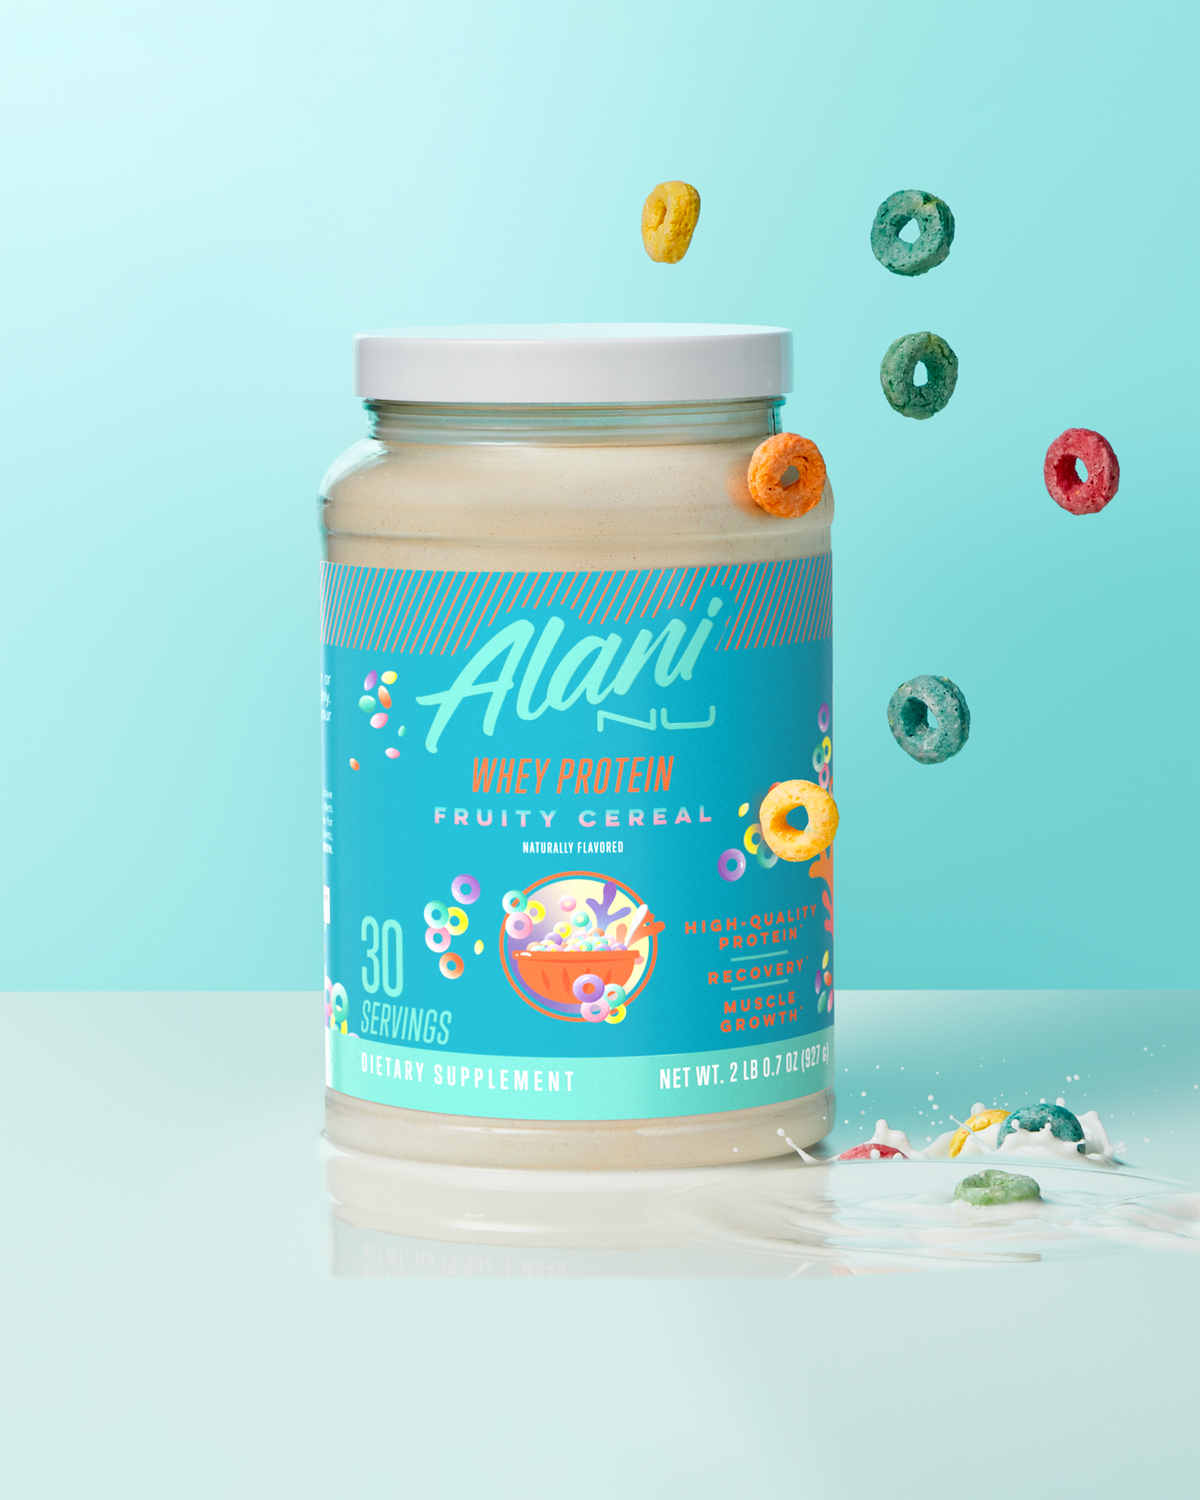 Alani Nu Frosted Flurry Plant Protein 30 Servings